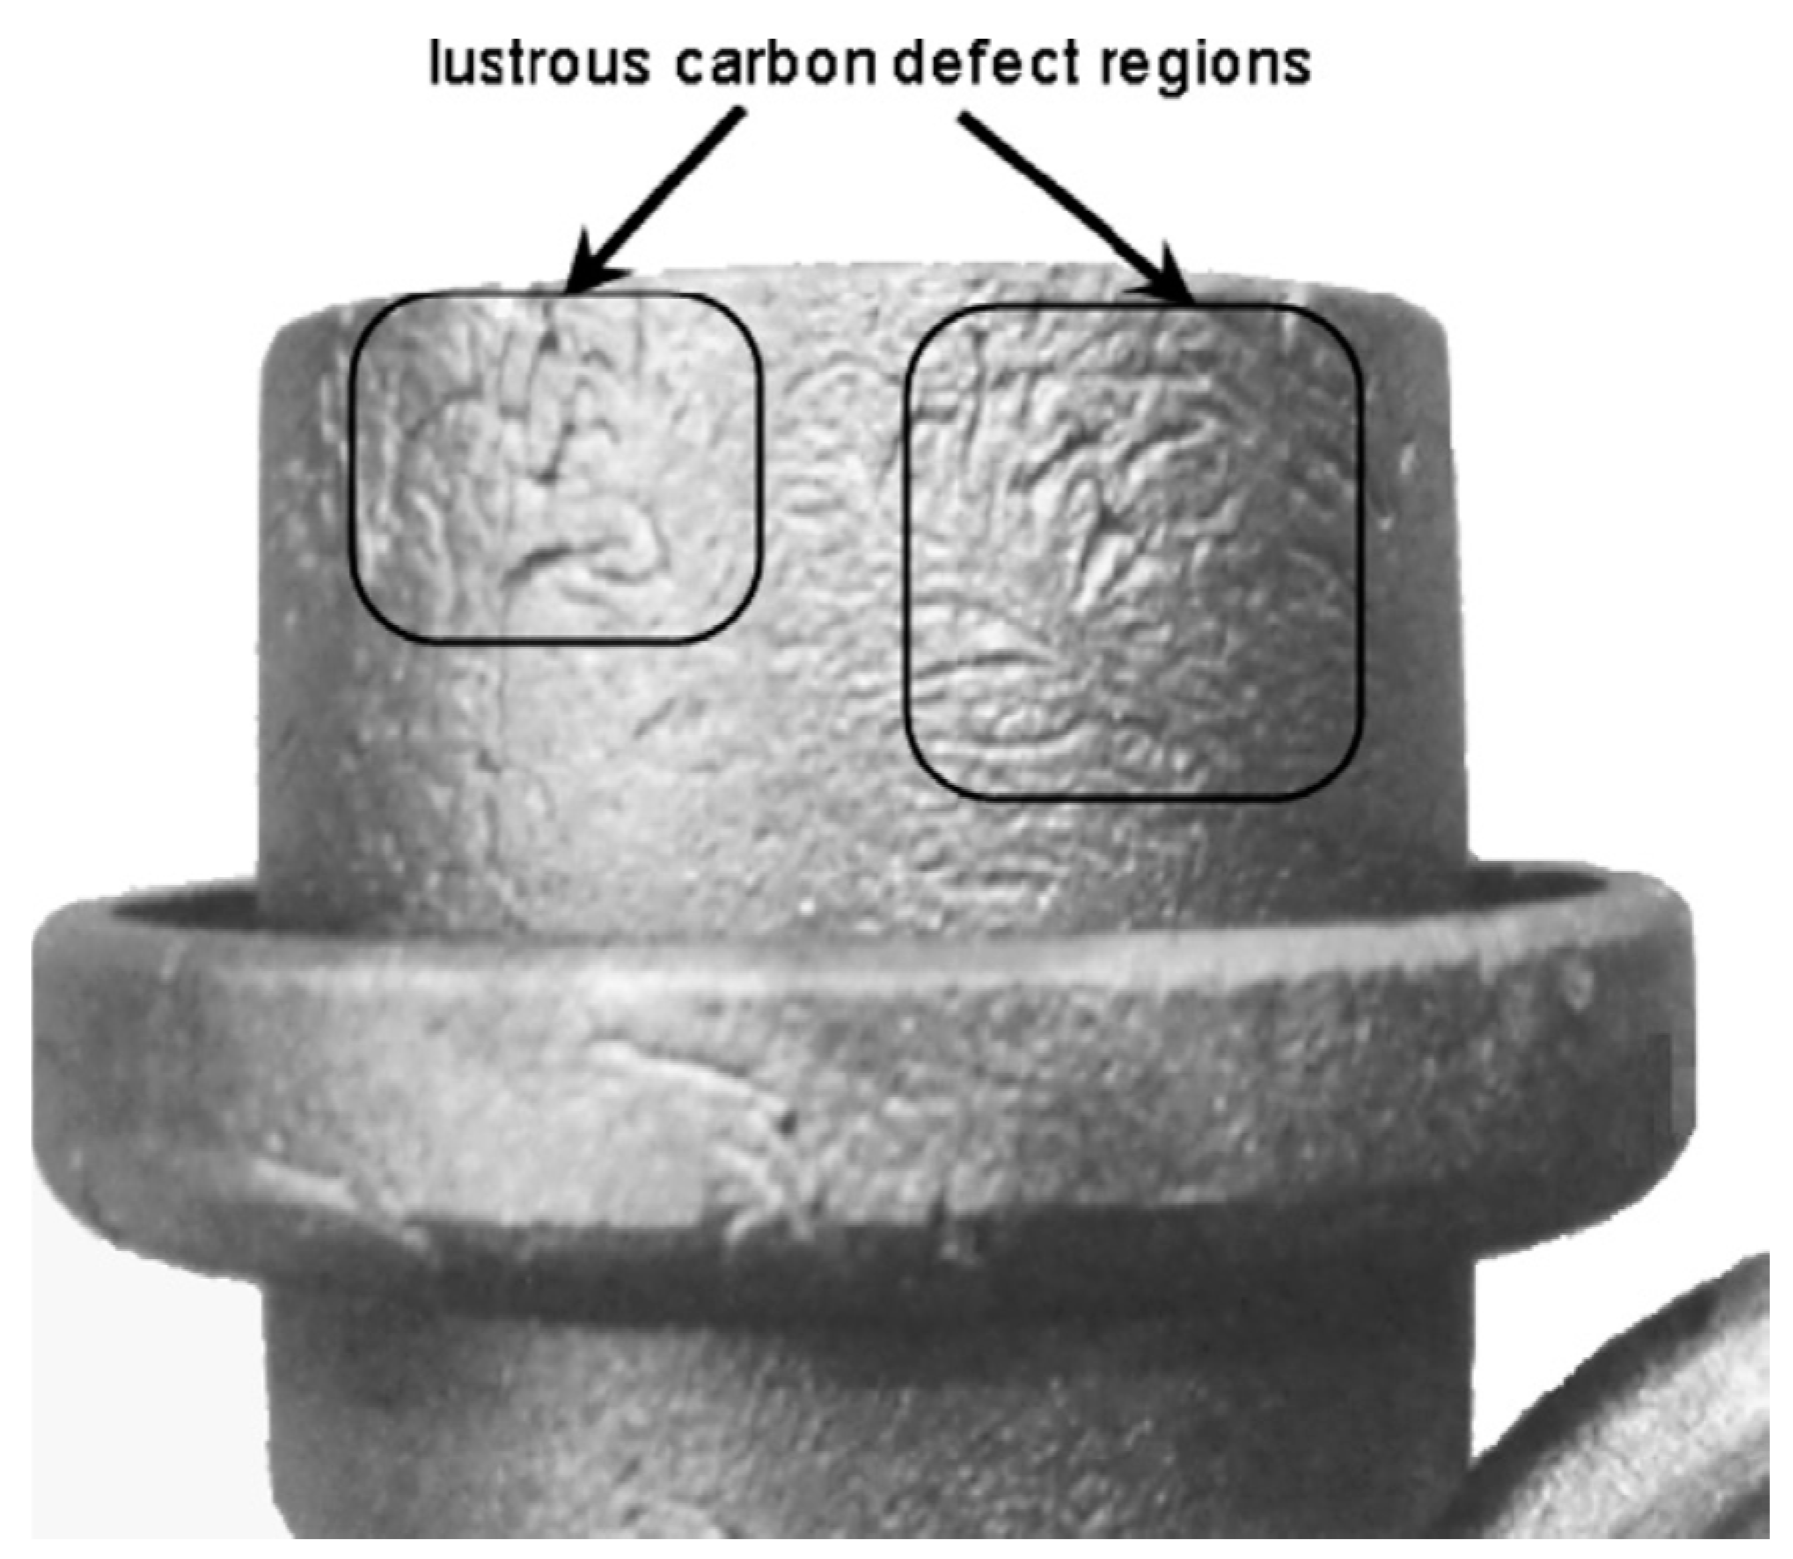 Metals | Free Full-Text | The Impact of Process Factors on Creating Defects,  Mainly Lustrous Carbon, during the Production of Ductile Iron Using the  Lost-Foam Casting (LFC) Method